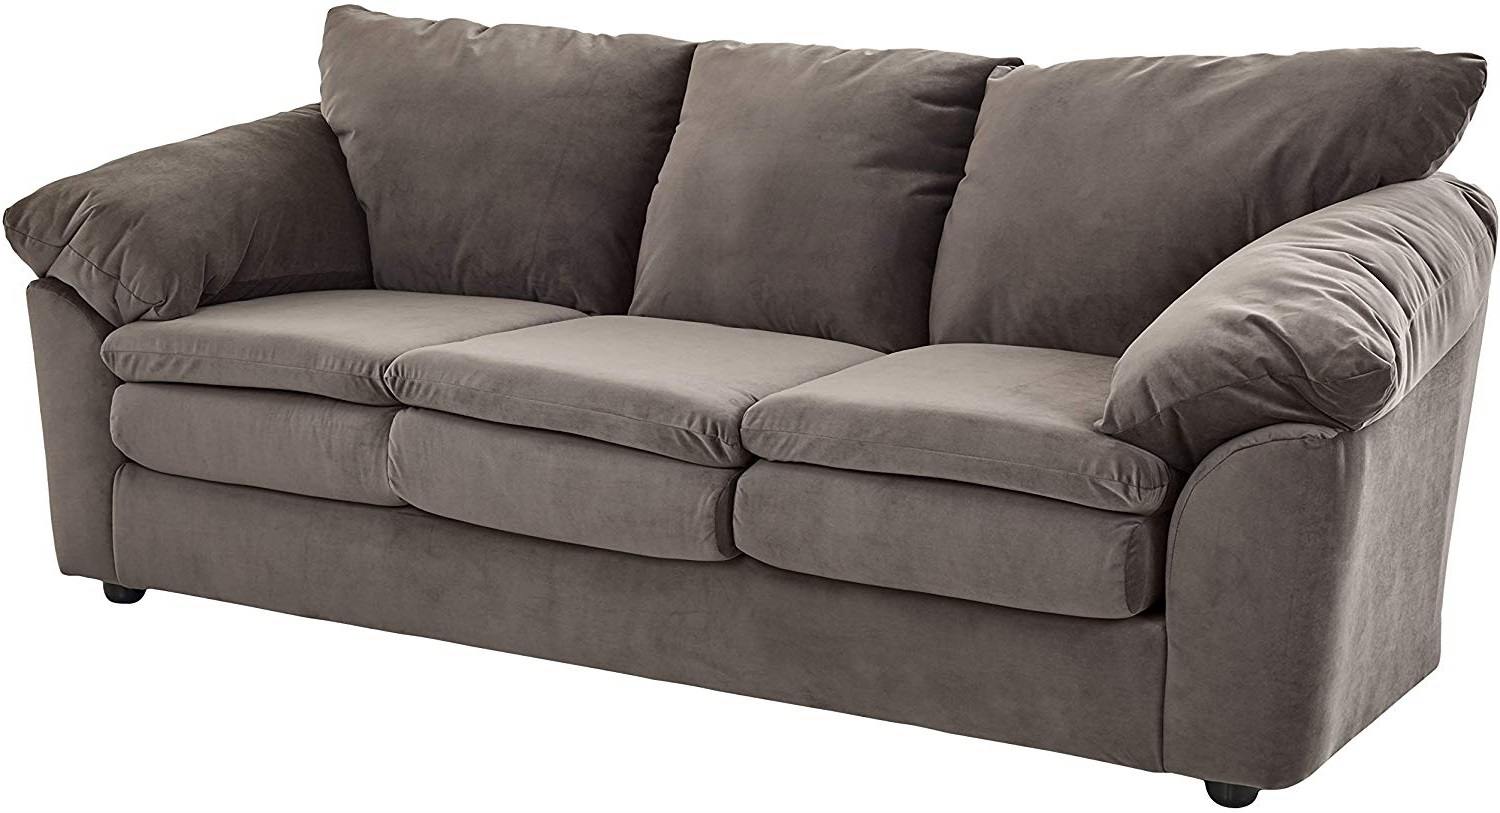 17 Most Comfortable Sofas 2023 1 Best Couch Reviews